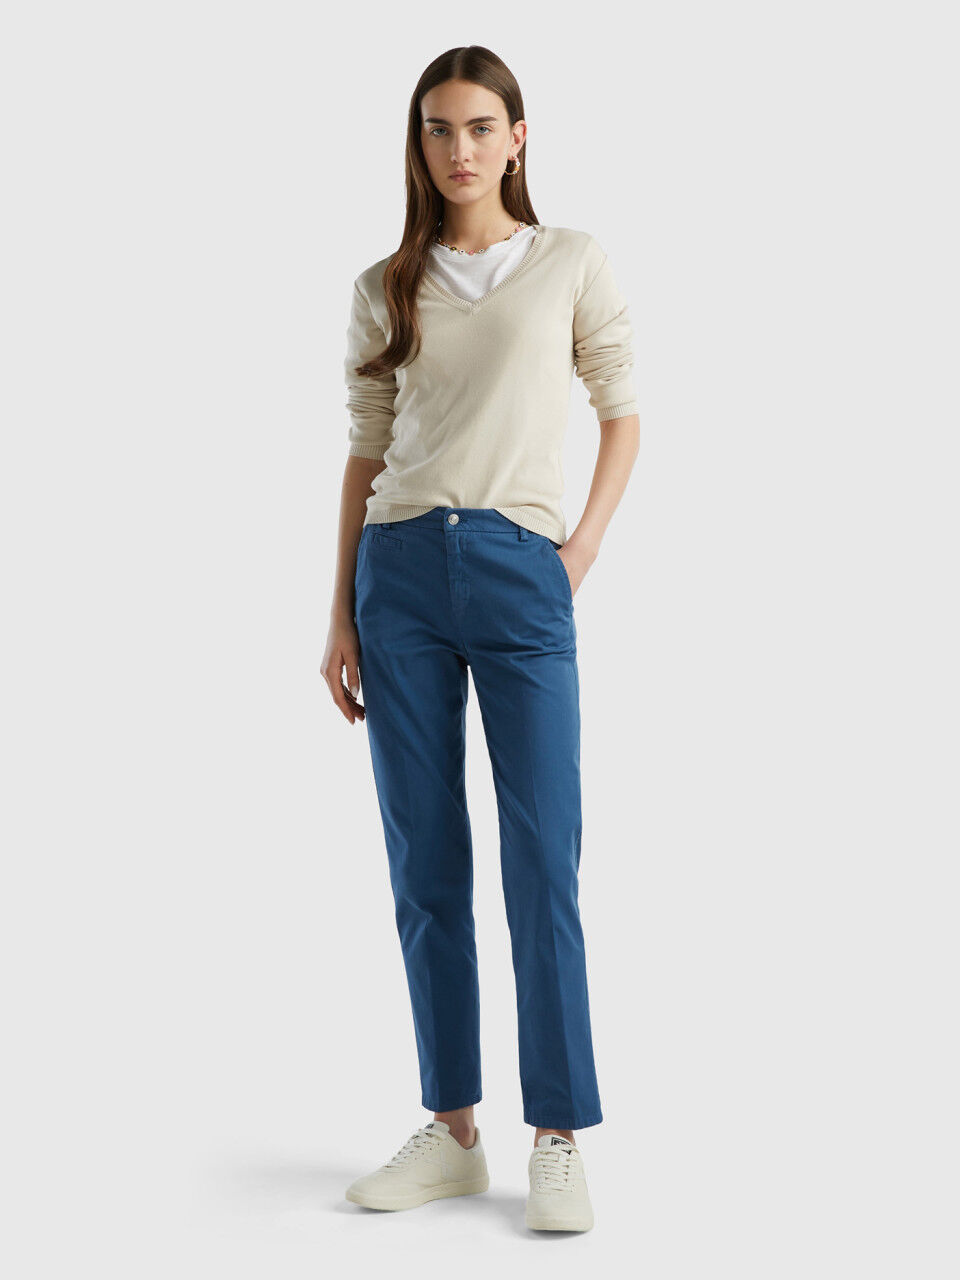 Women's Clearance Classic Corduroy Peg Pant made with Organic Cotton | Pact